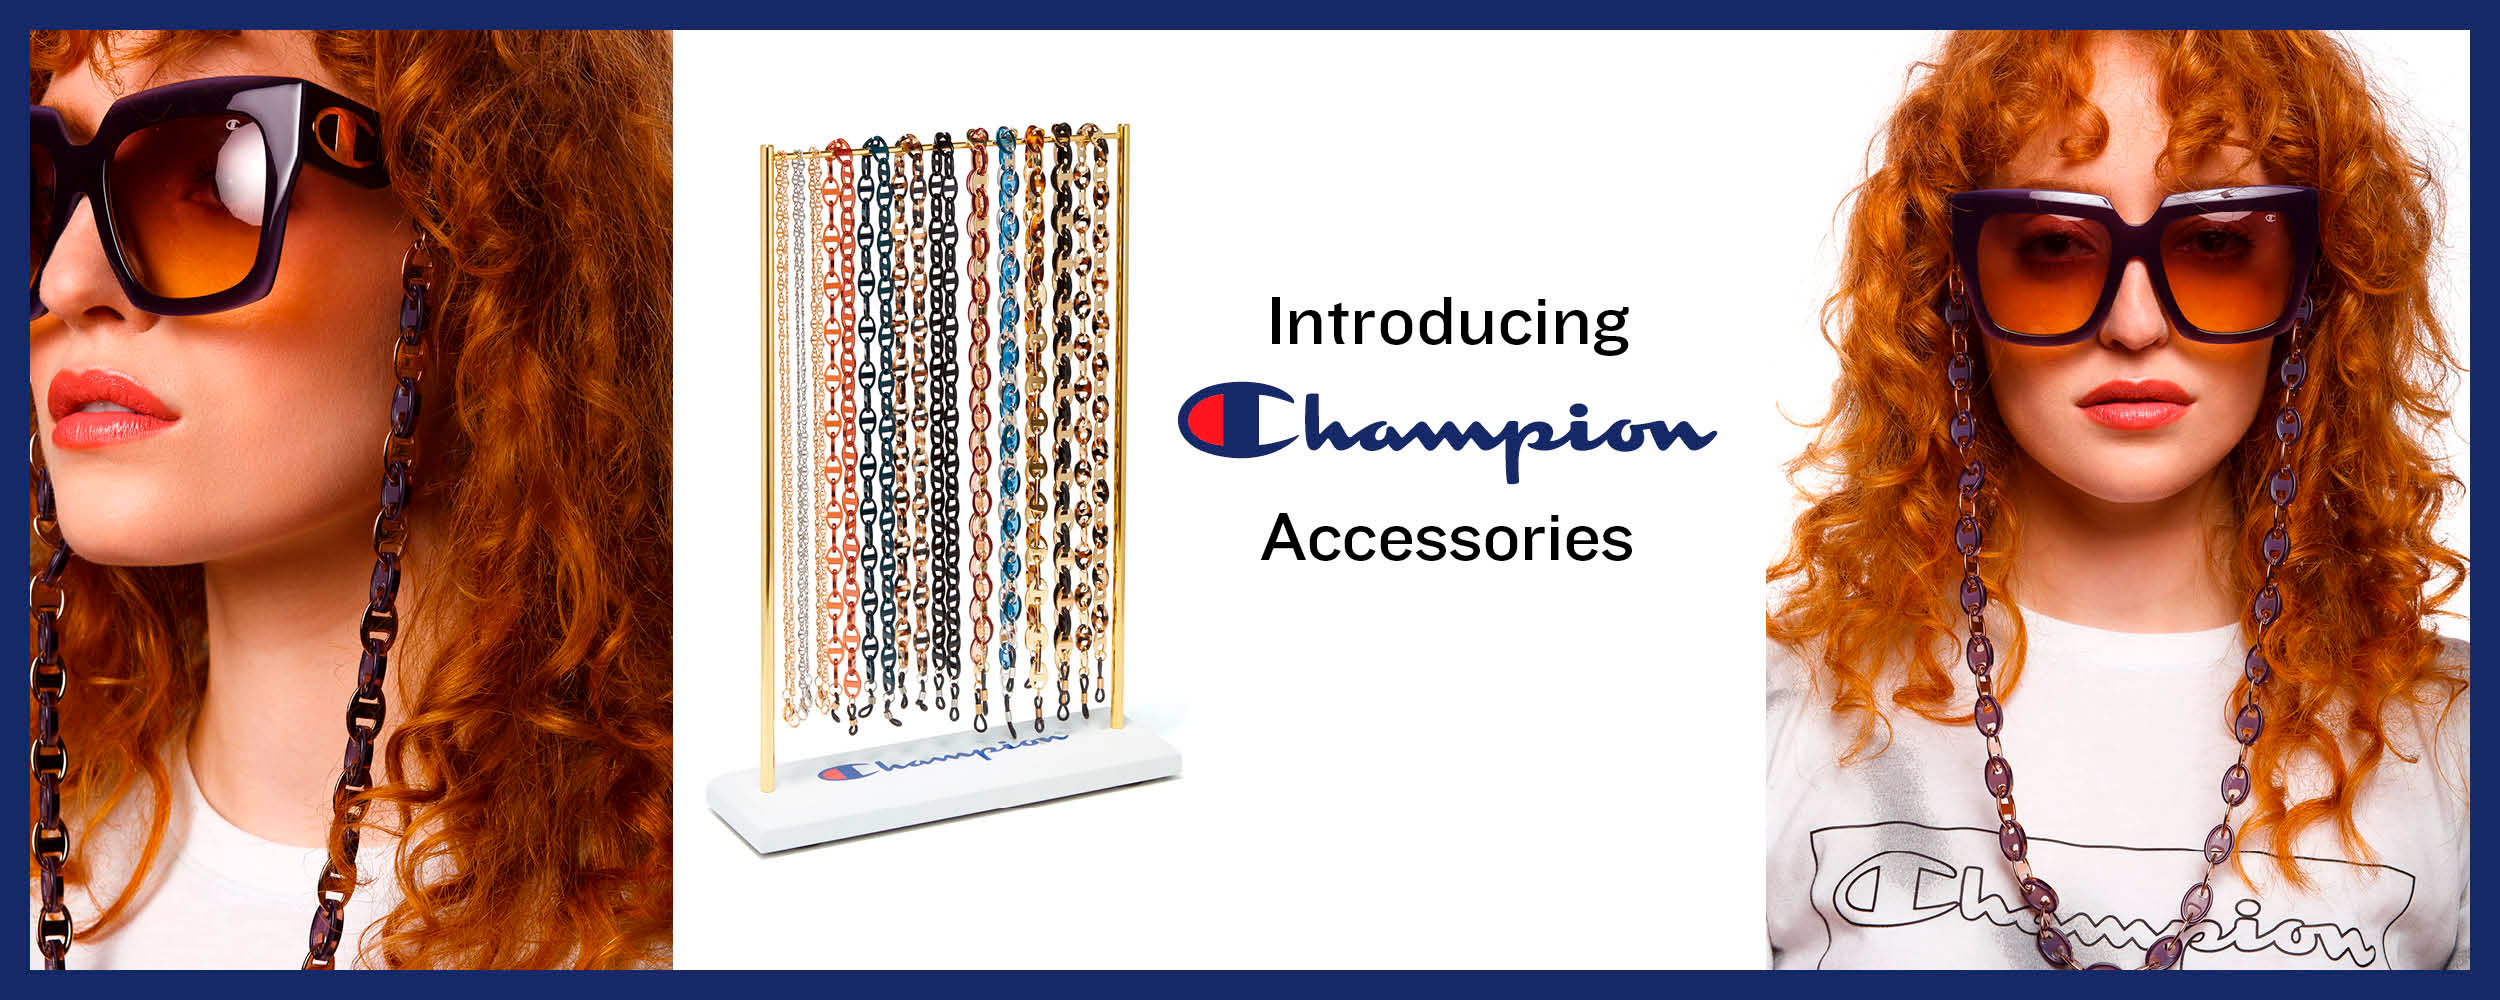 Introducing Champion accessories.